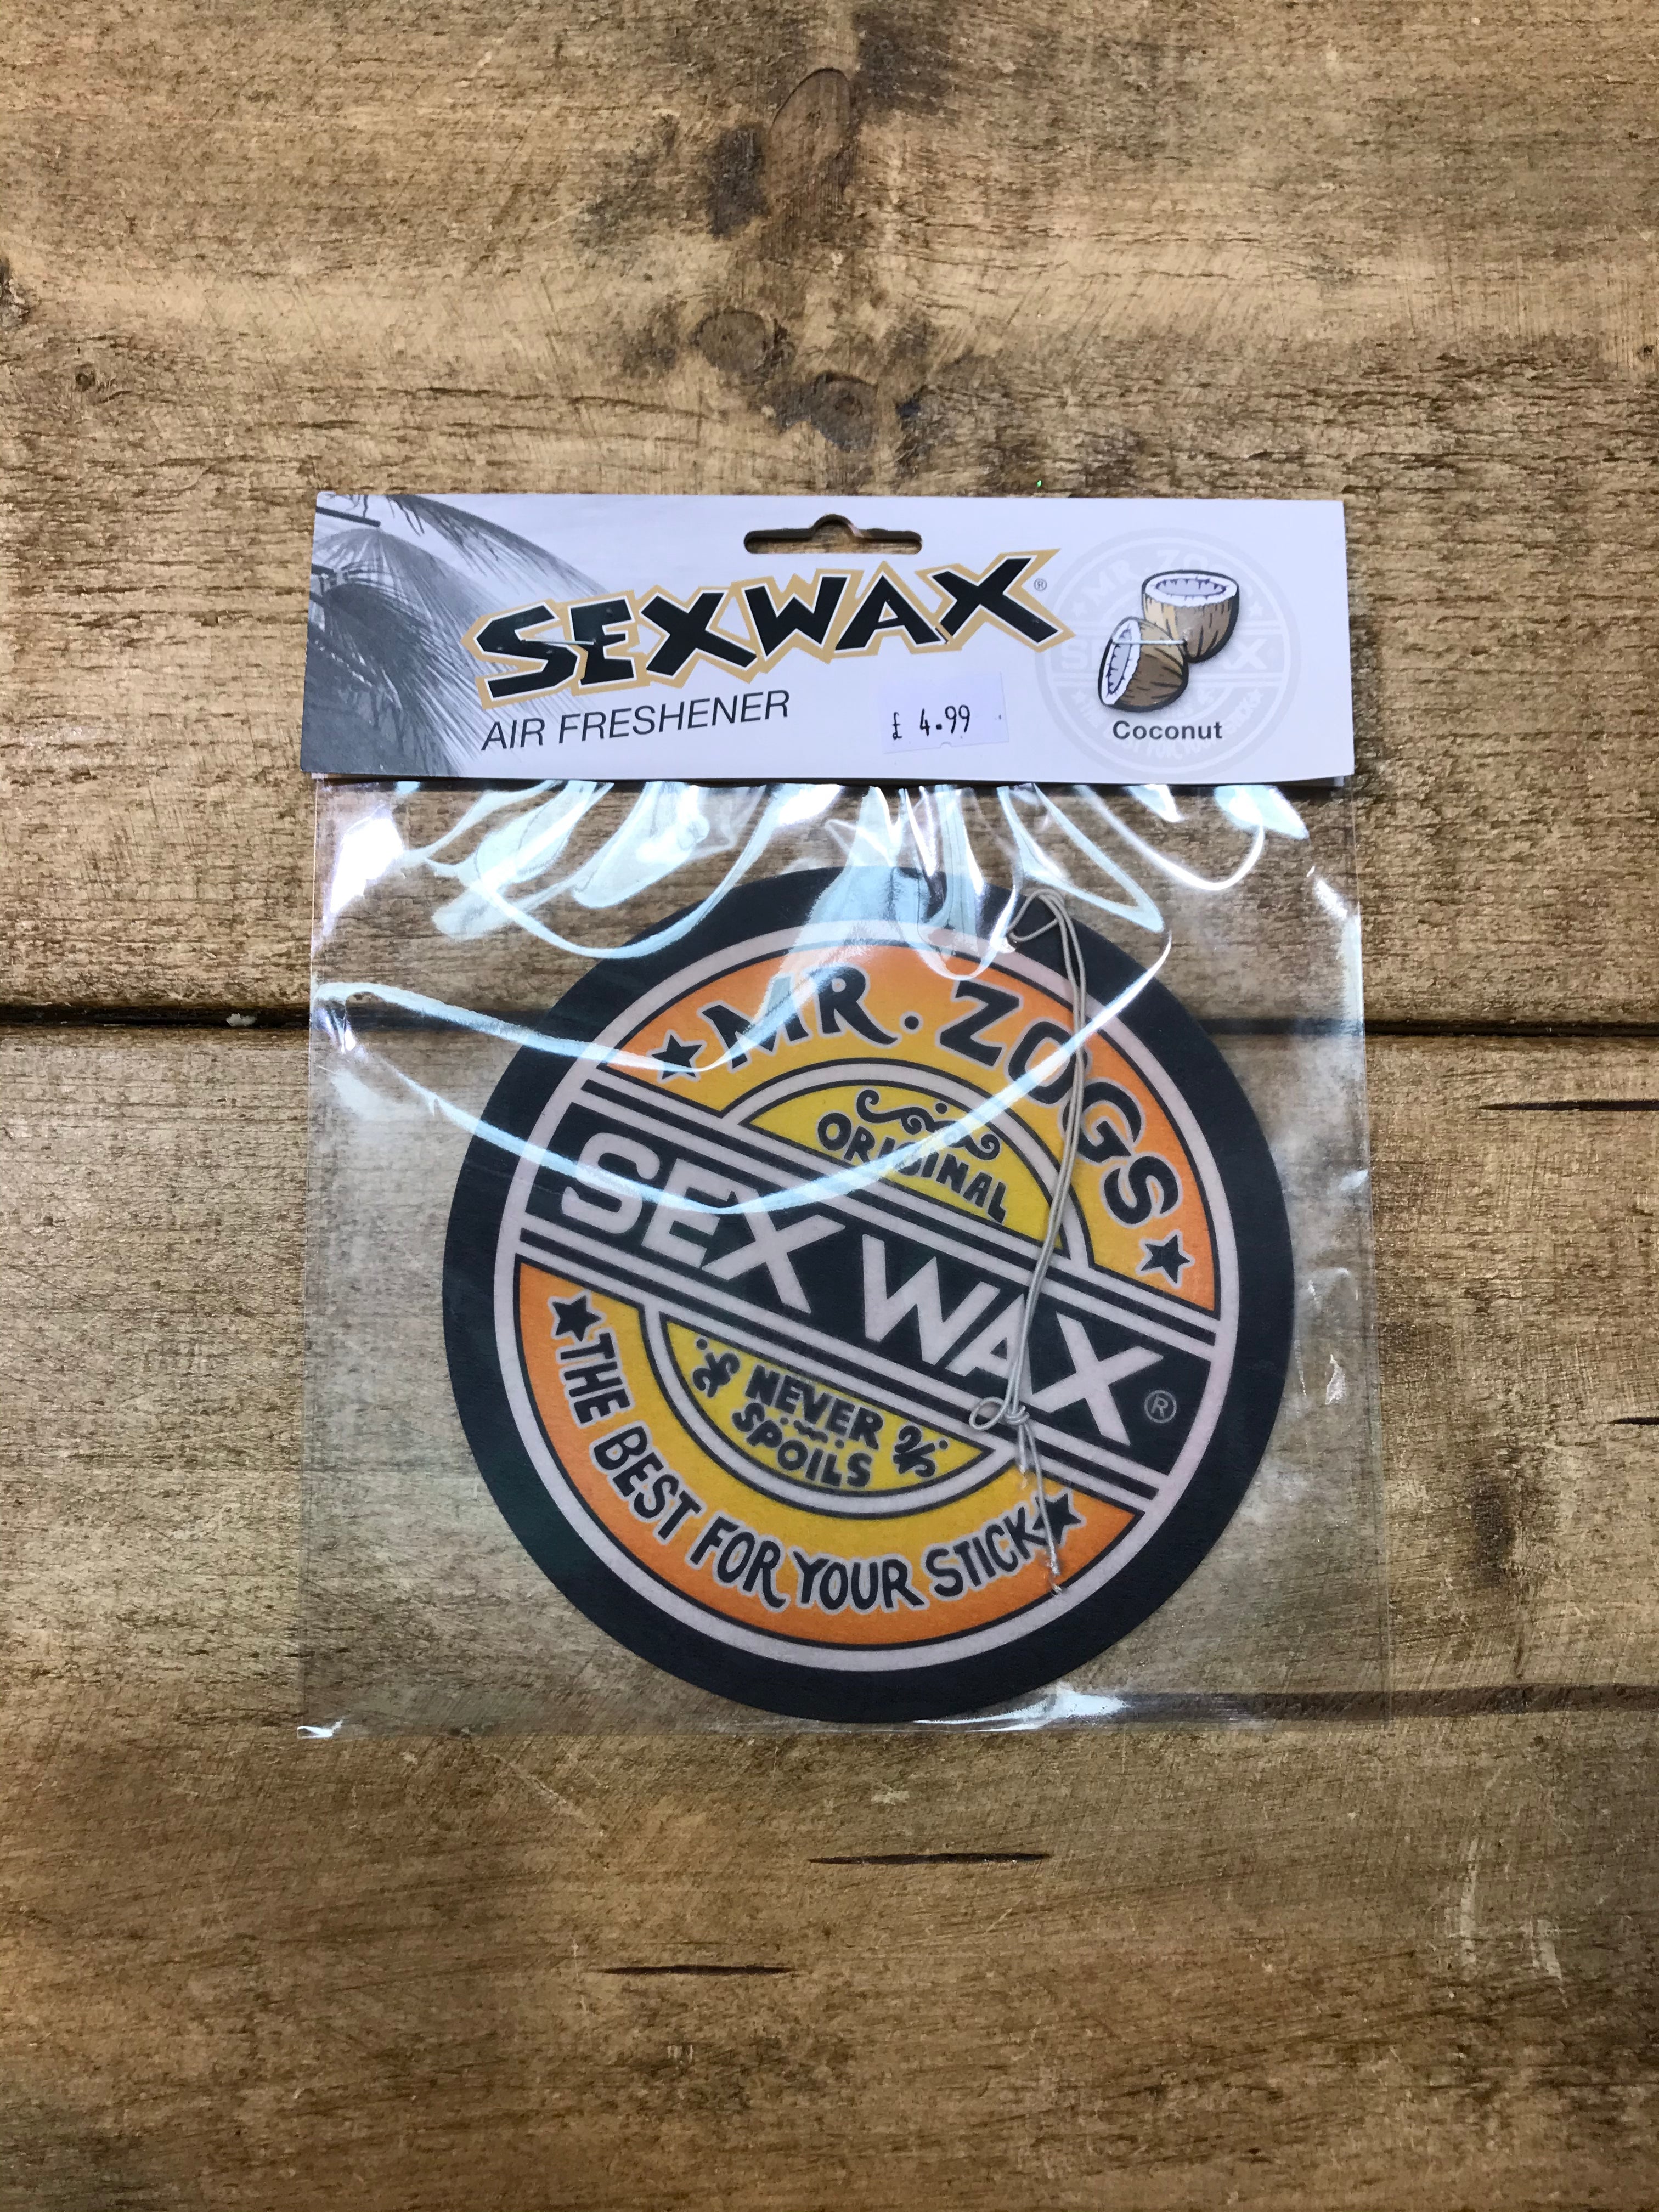 SexWax Coconut Car Freshener from Mr. Zogs.